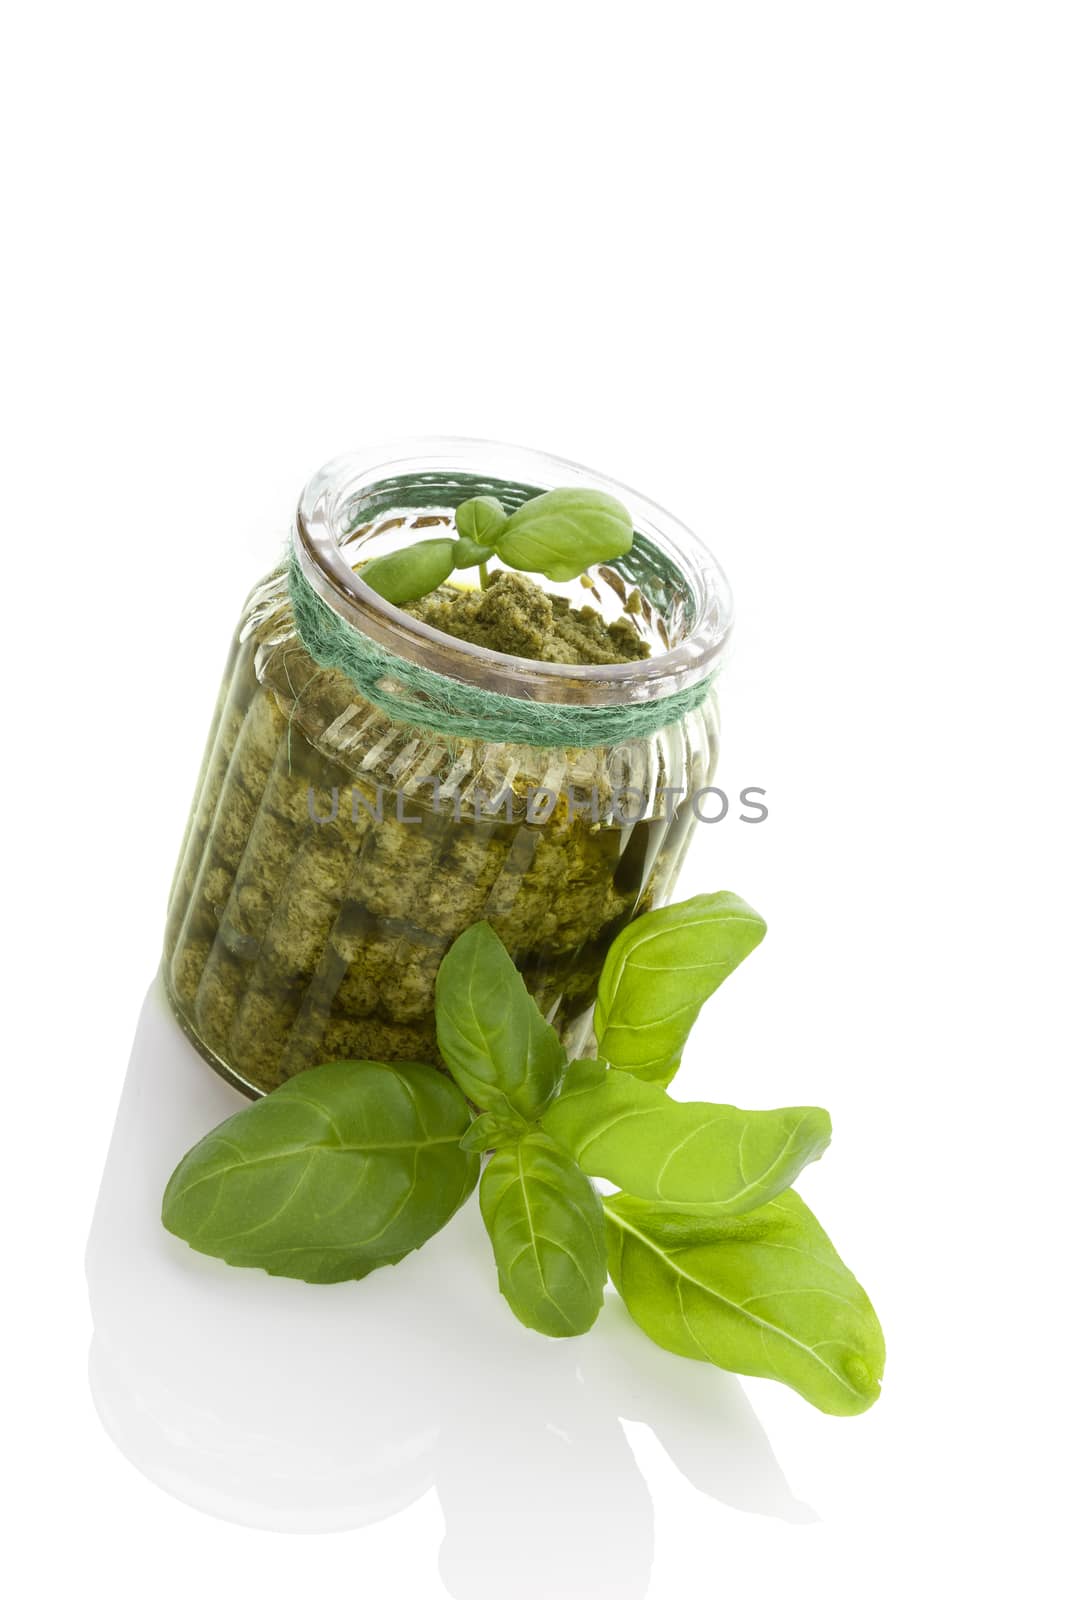 Green basil pesto in glass jar isolated on white background. Healthy vegetarian eating.